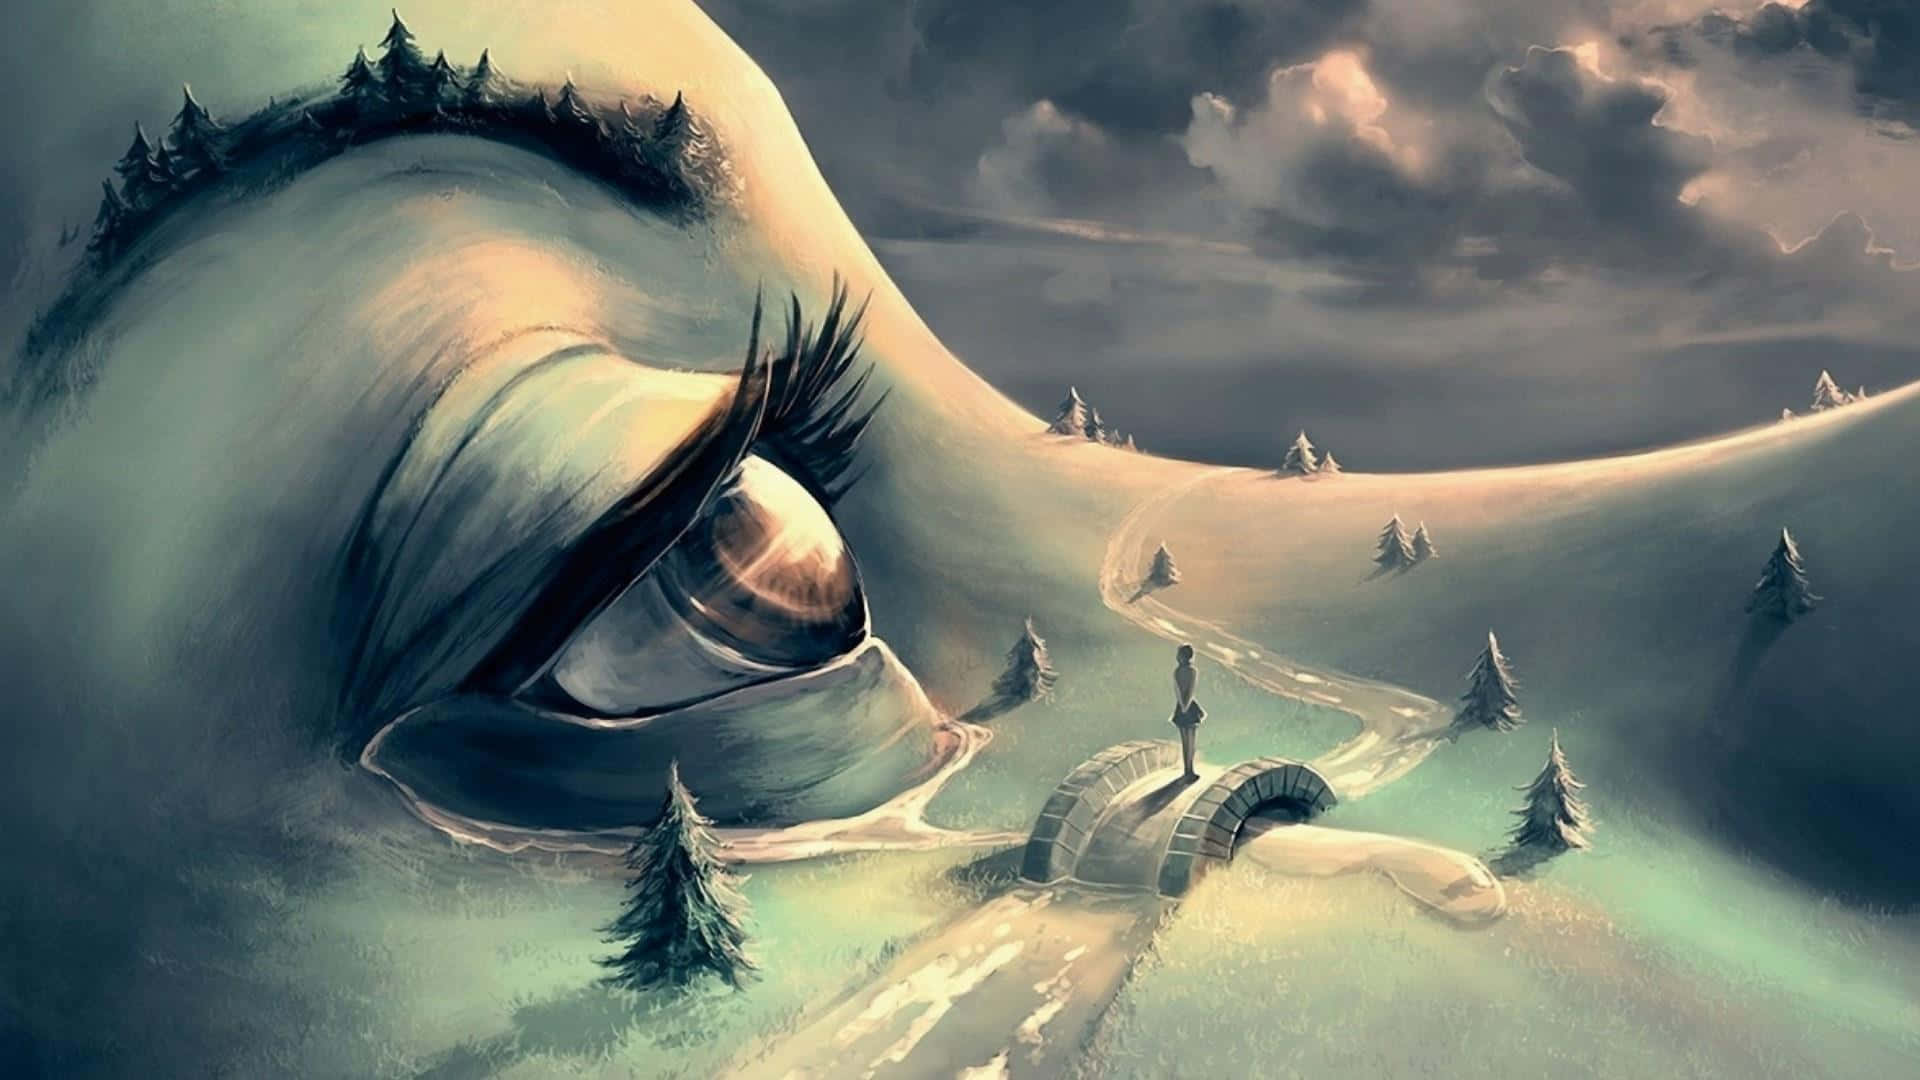 Free Surreal Art Wallpaper Downloads, [100+] Surreal Art Wallpapers for  FREE 